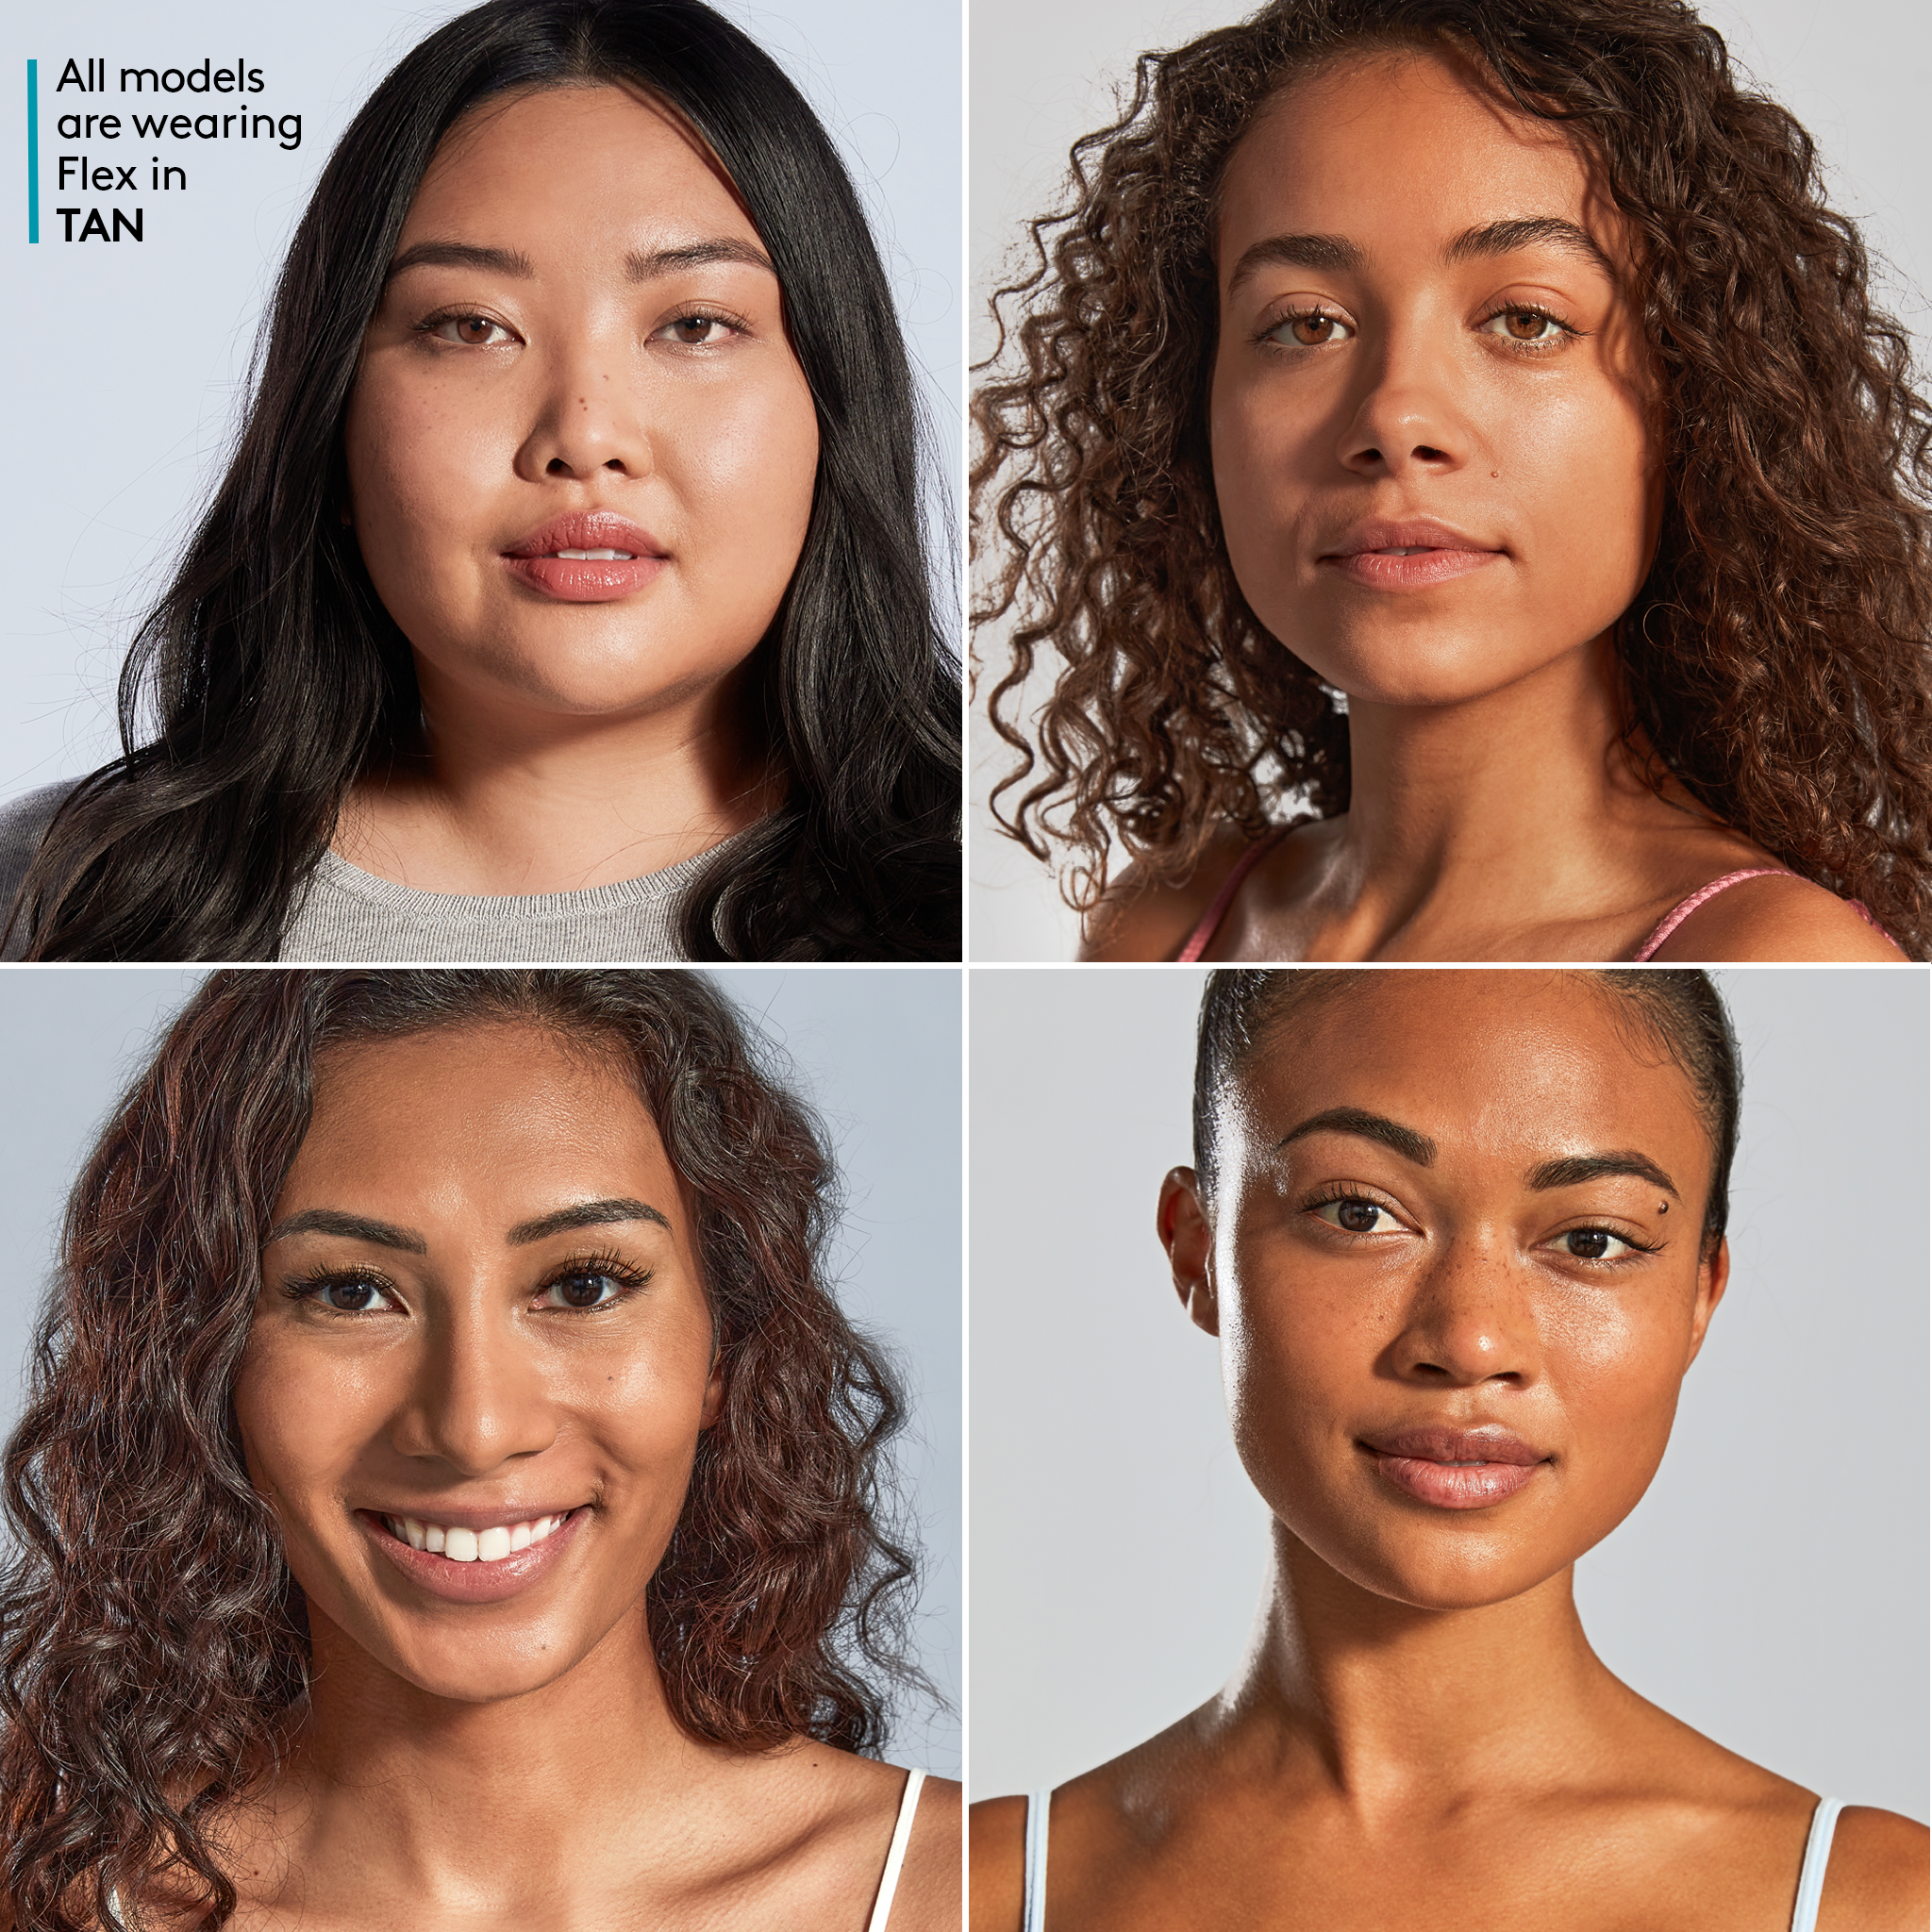 four female models wearing Face Shield SPF 50 Flex in Tan Shade || all